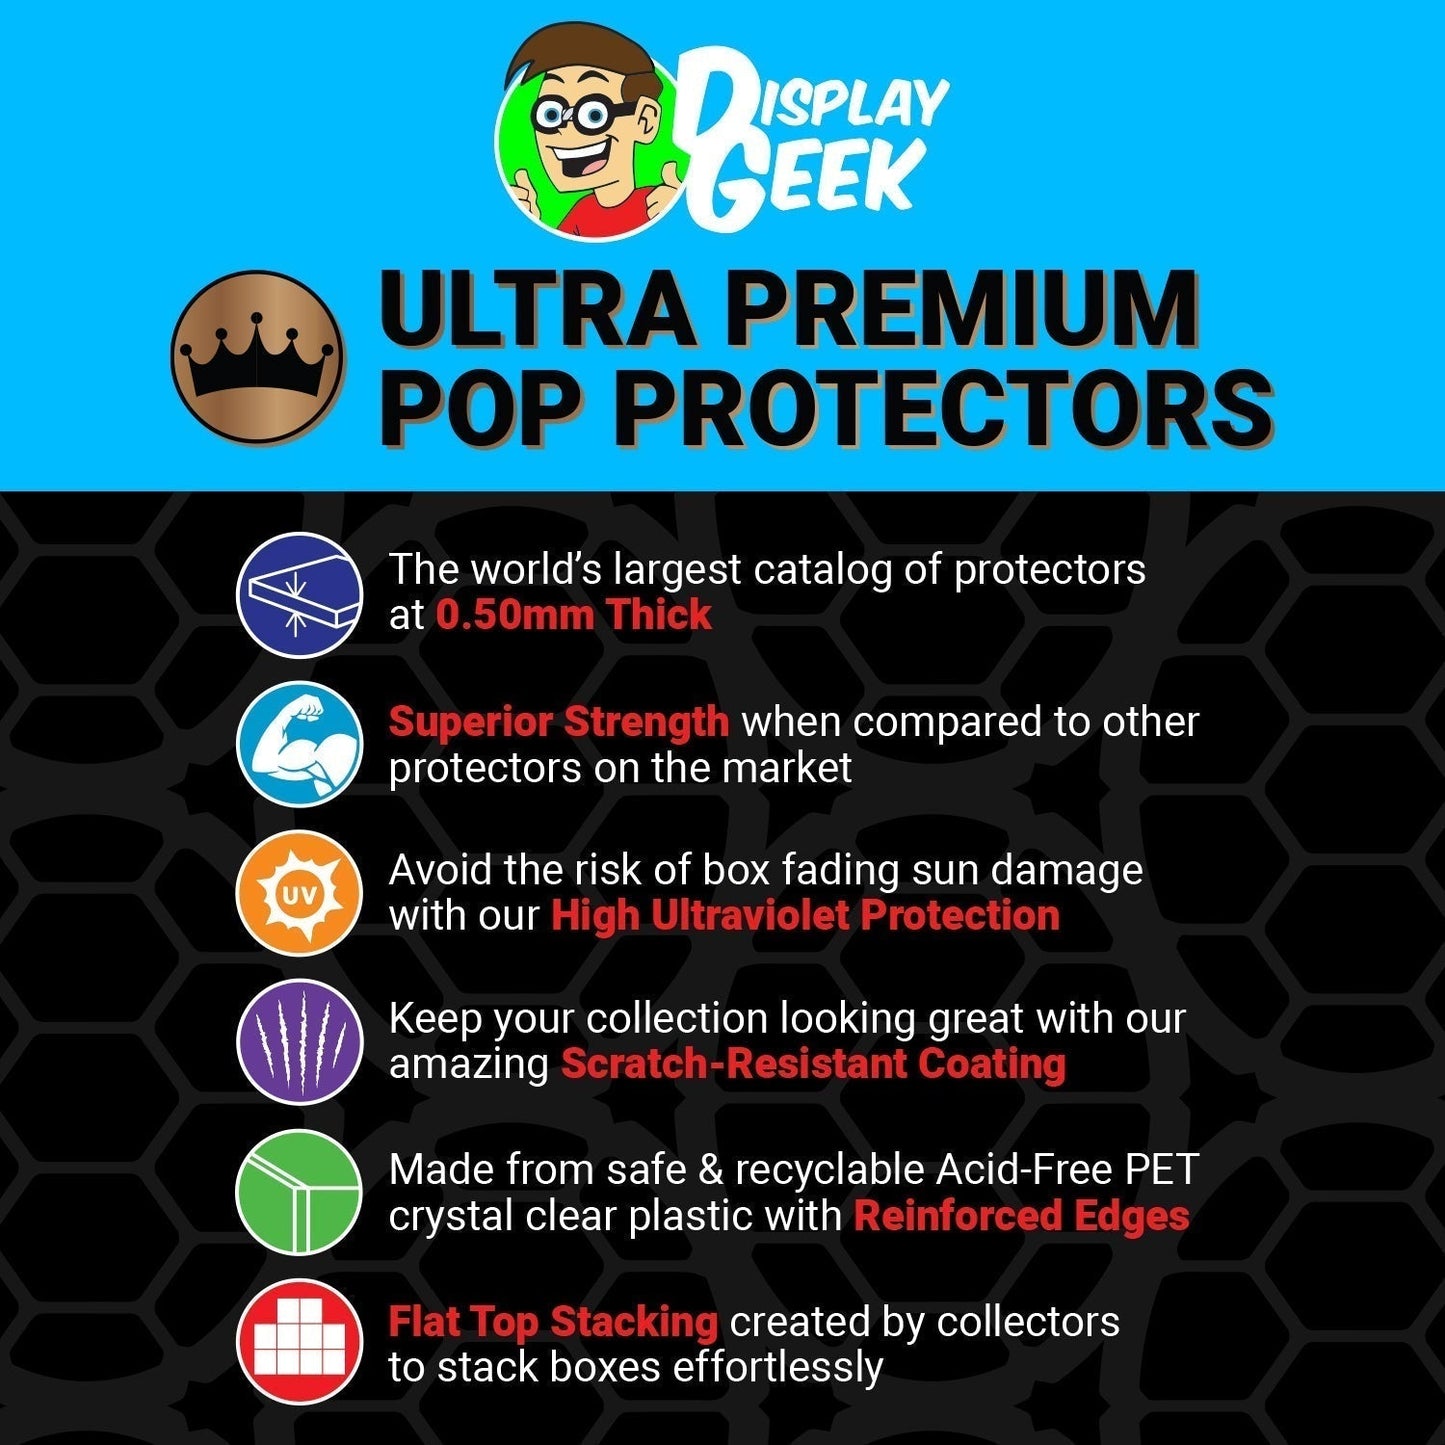 Pop Protector for 6 inch Baymax Emoticon SDCC #111 Super Funko Pop - PPG Pop Protector Guide Search Created by Display Geek